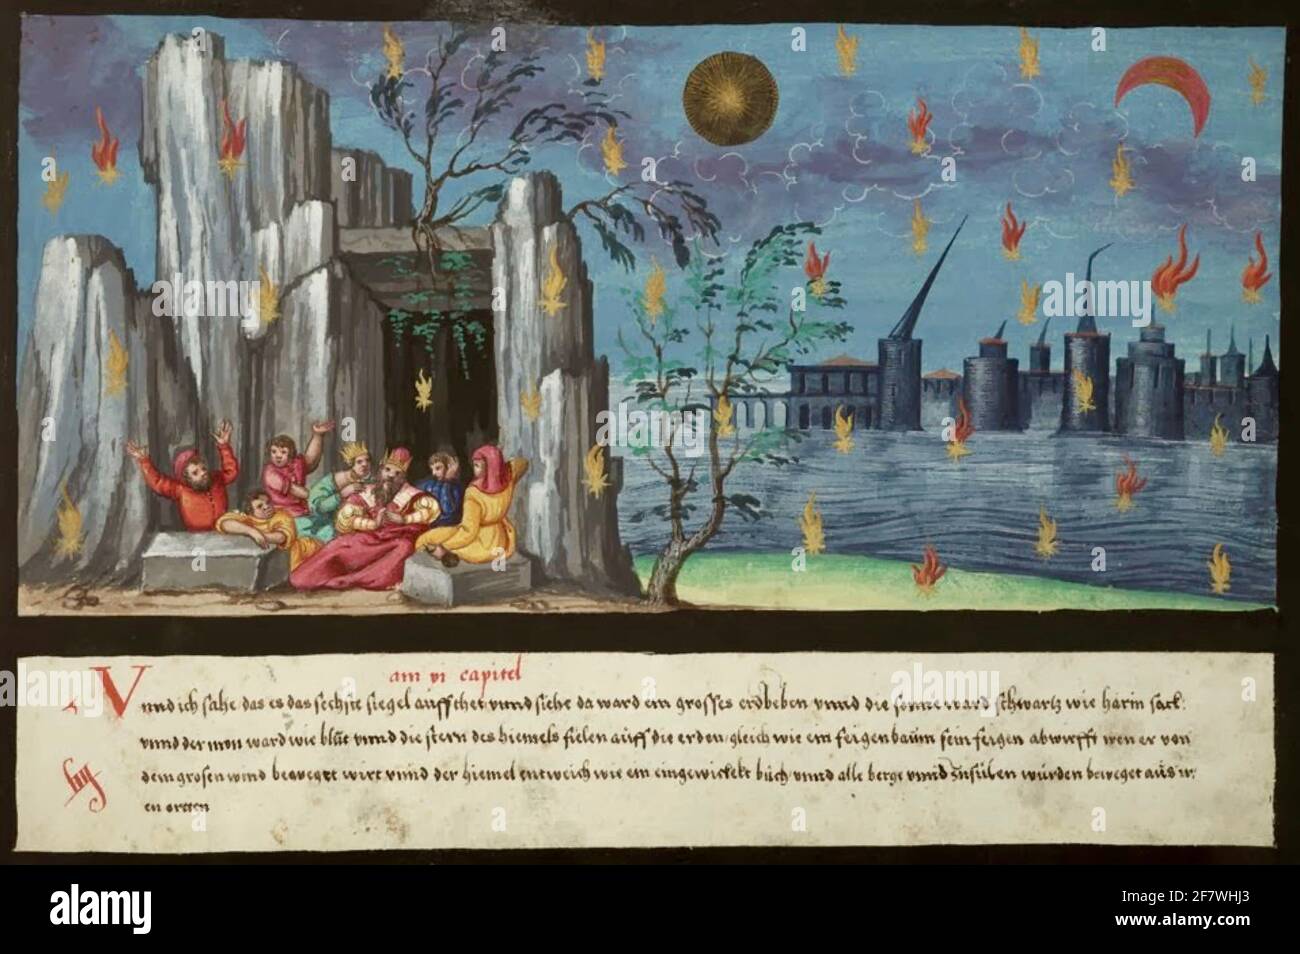 Image from Augsburg Book of Miracles show scene from final book of the New Testament - the Book of Revelations of St John the Divine. Stock Photo